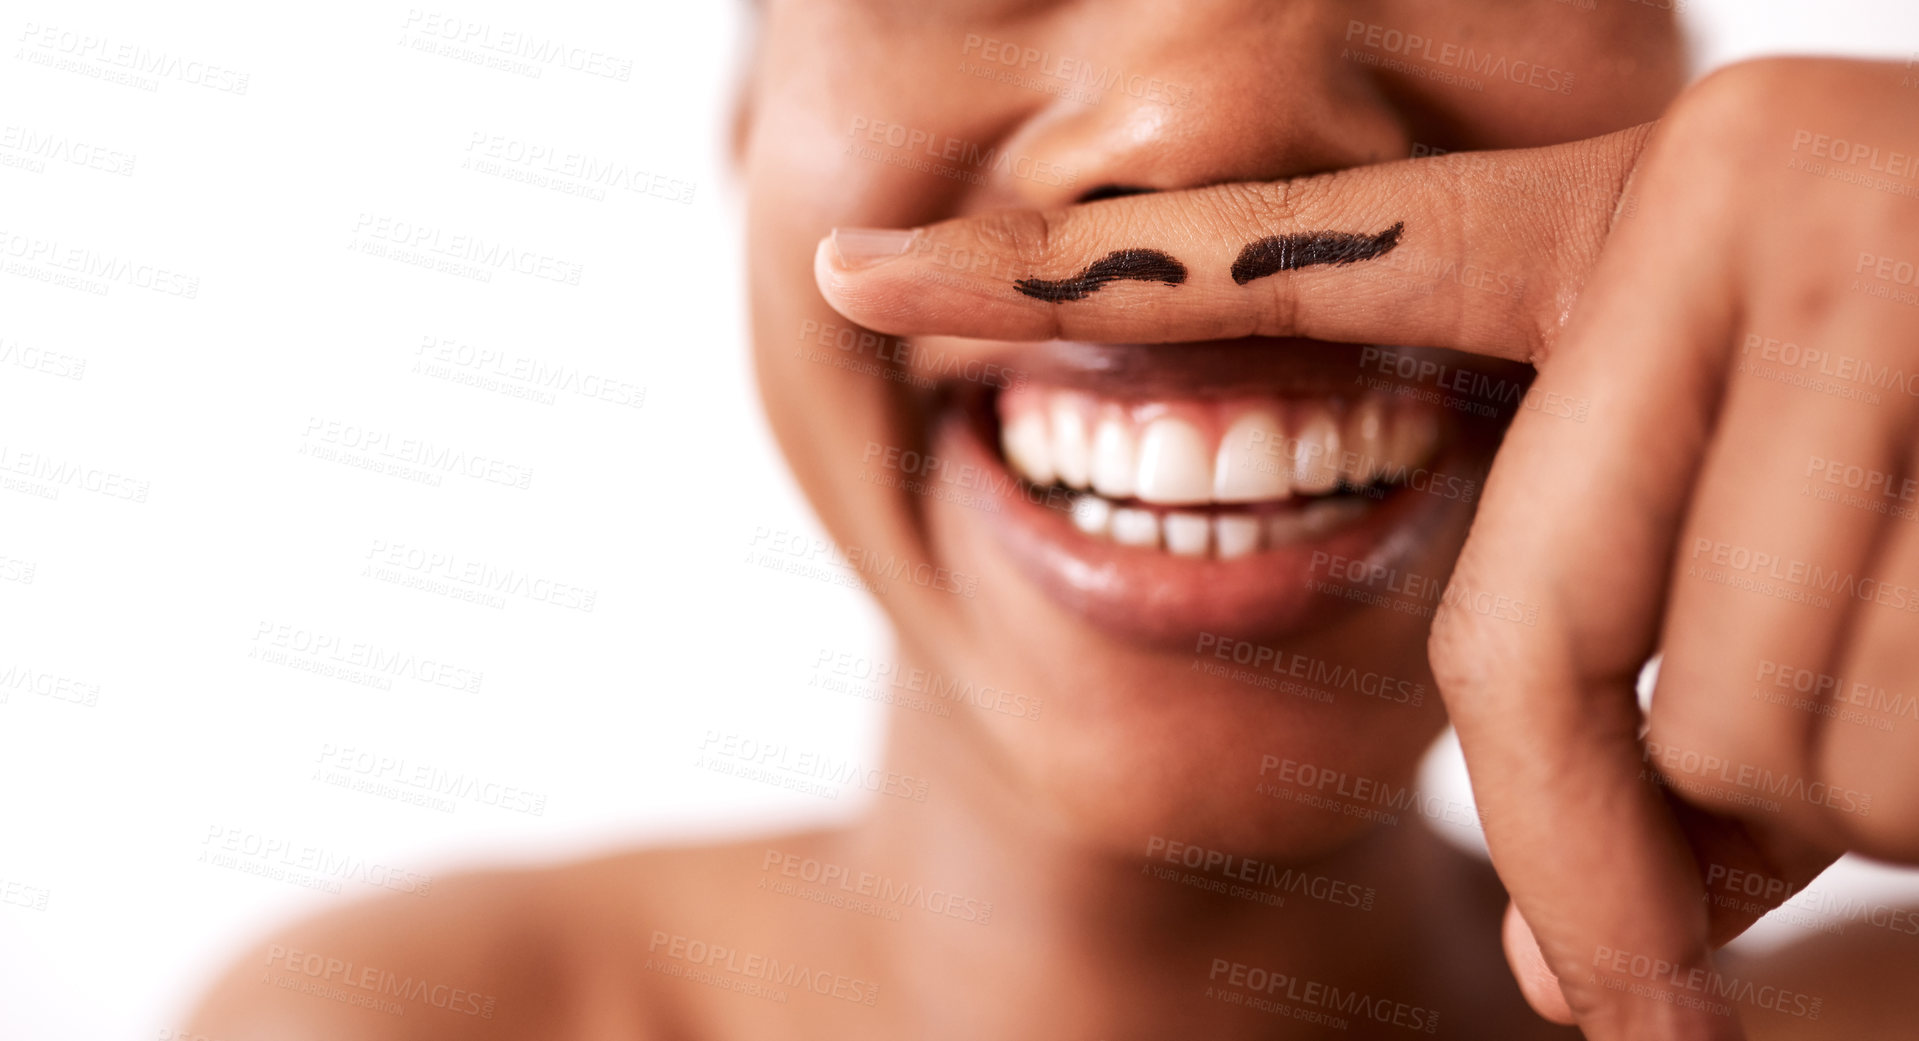 Buy stock photo Studio shot of an unrecognizable woman posing with a moustache drawn on her finger